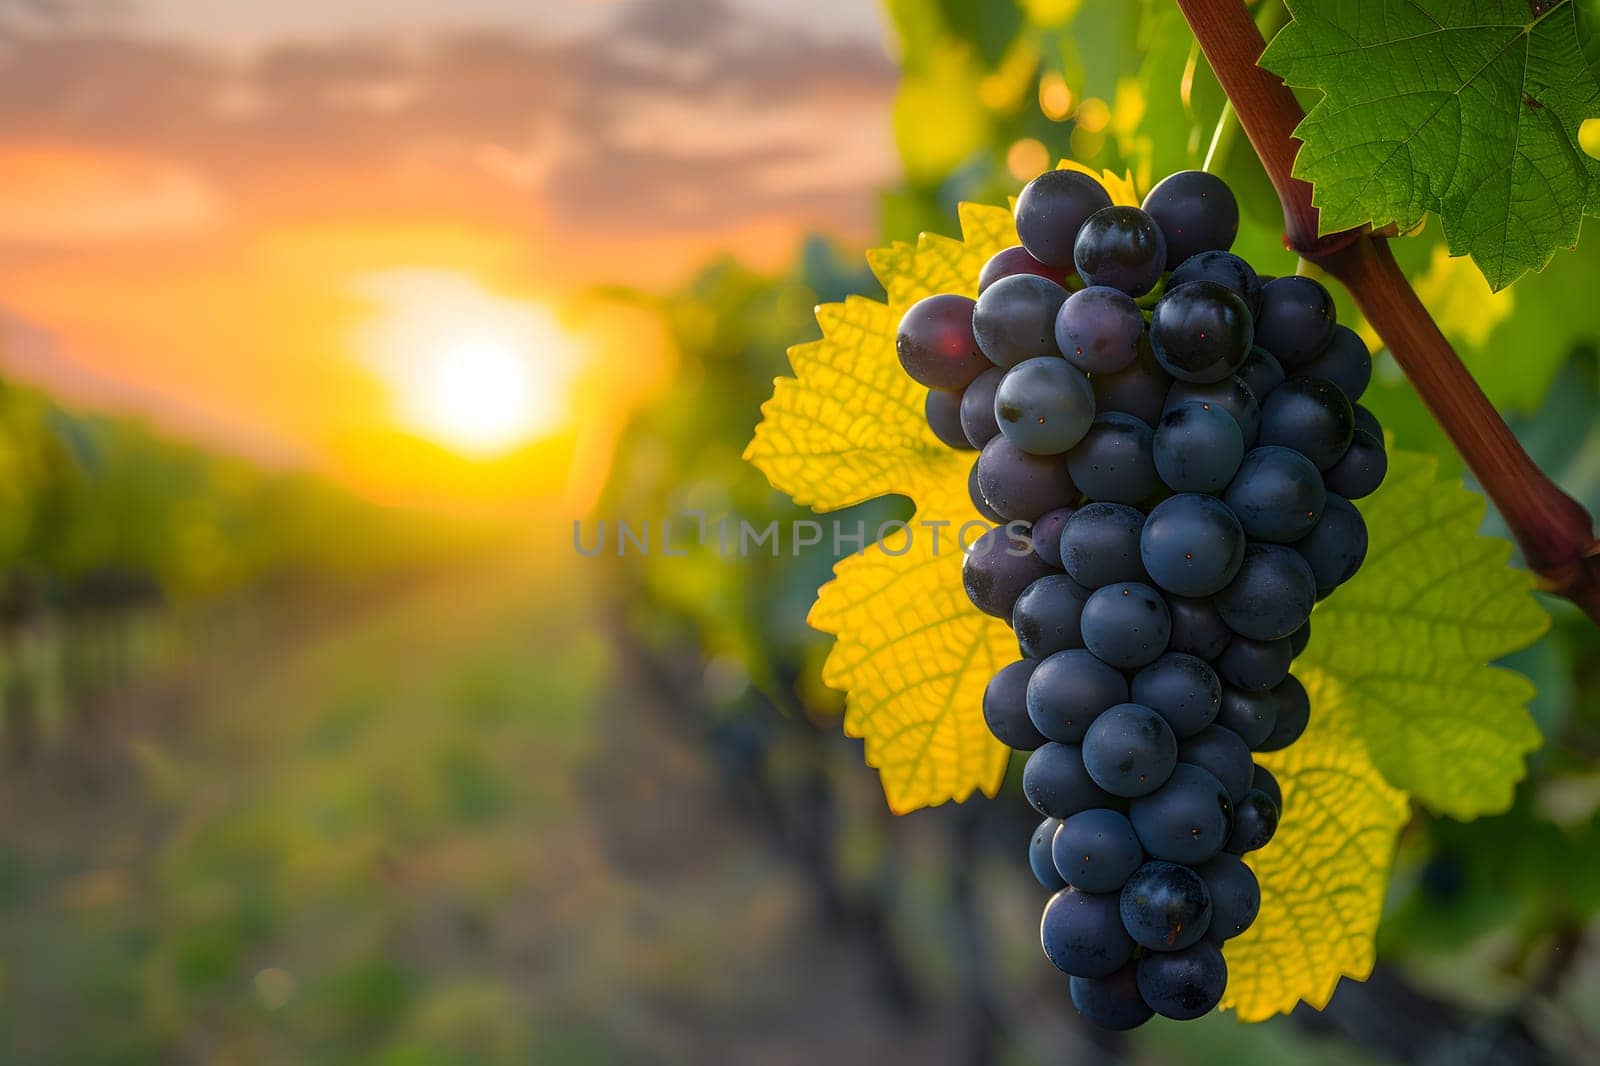 A cluster of seedless grapes hangs from a grapevine in a vineyard, surrounded by grape leaves, as the sun sets over the natural foodproducing plant